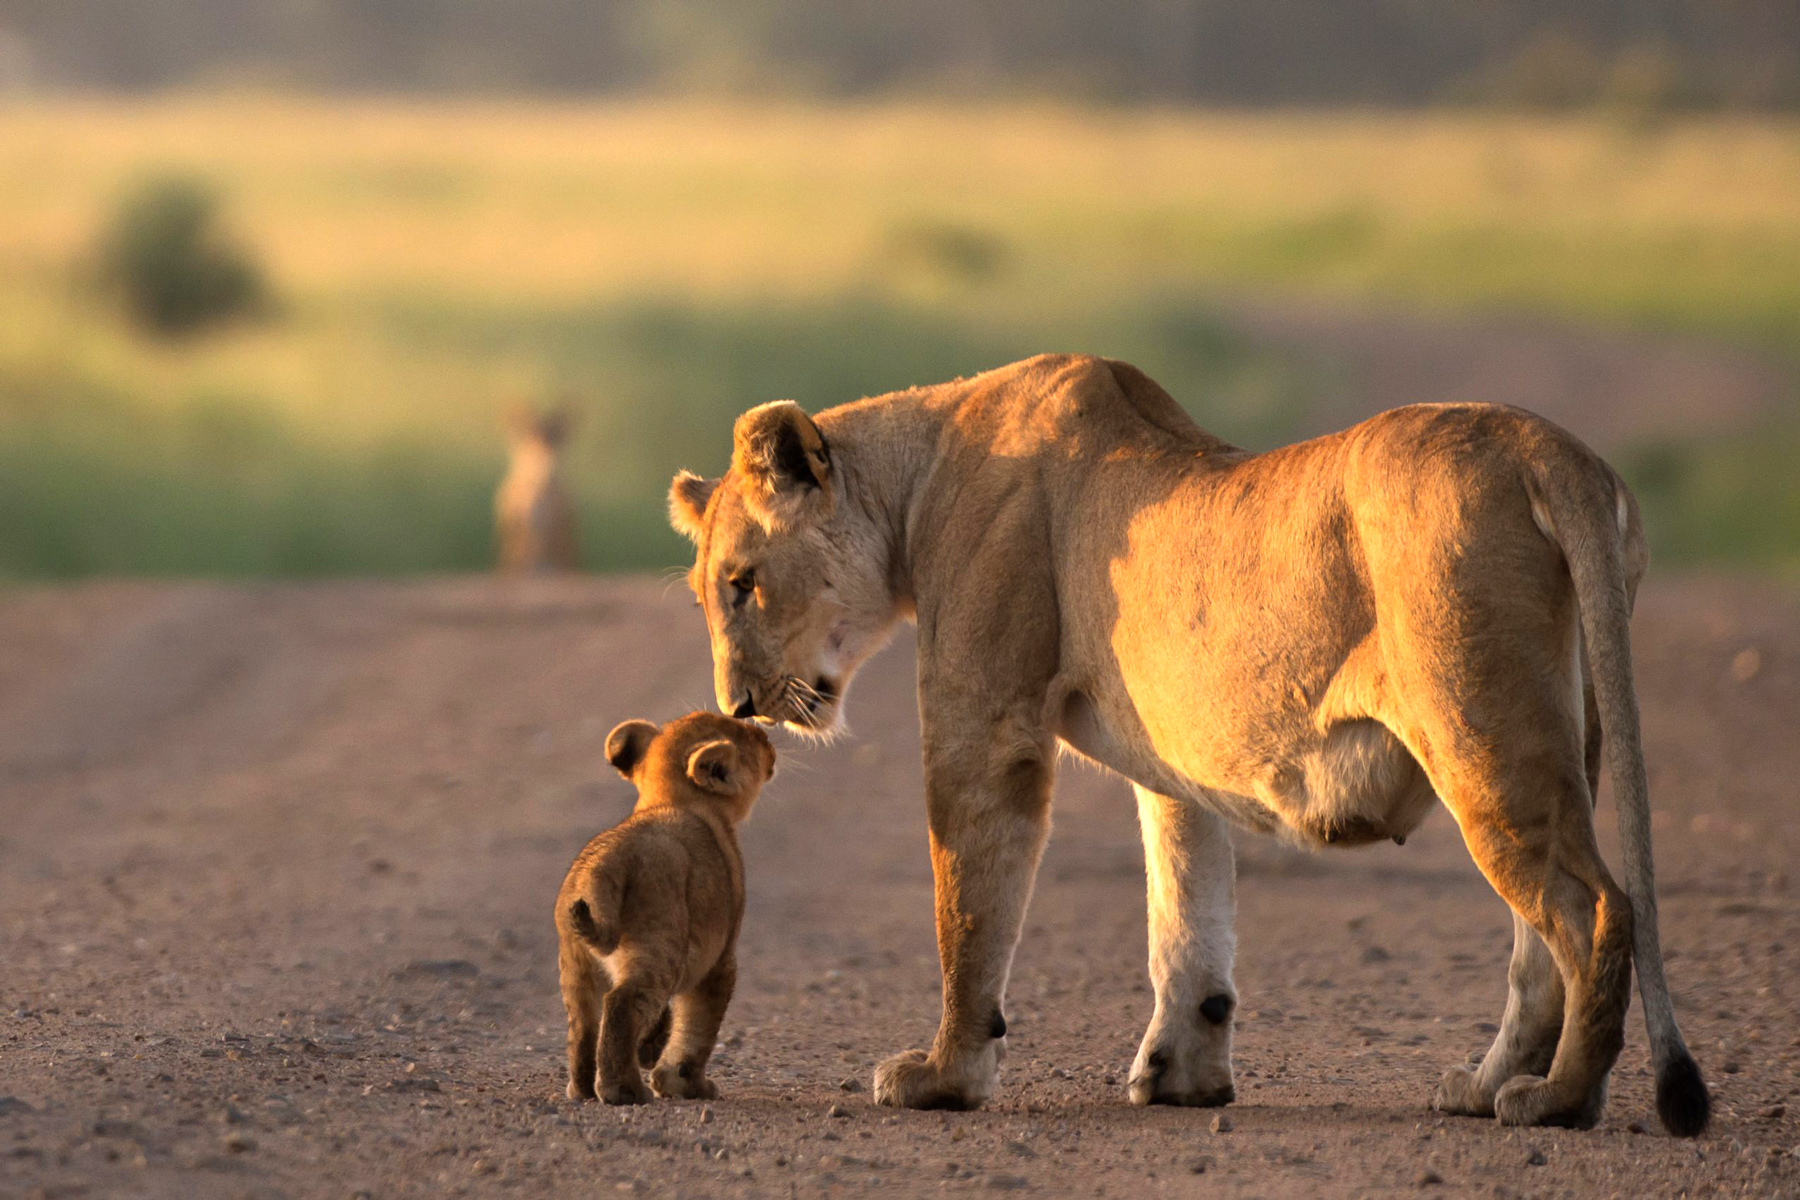 A lioness and cub in the wild credit Roar Africa